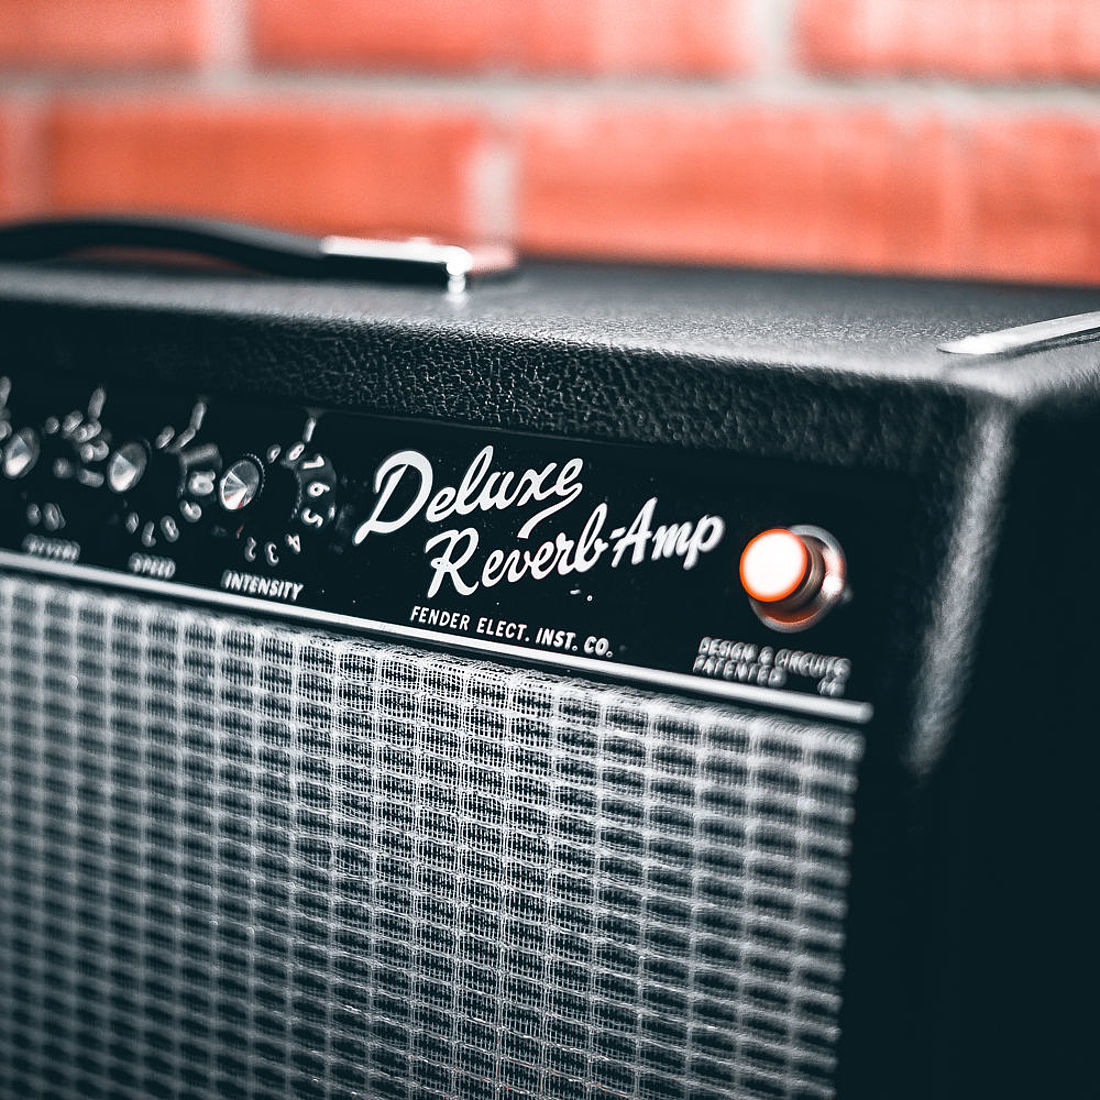 [Translate to Englich:] Fender_deluxe_reverb